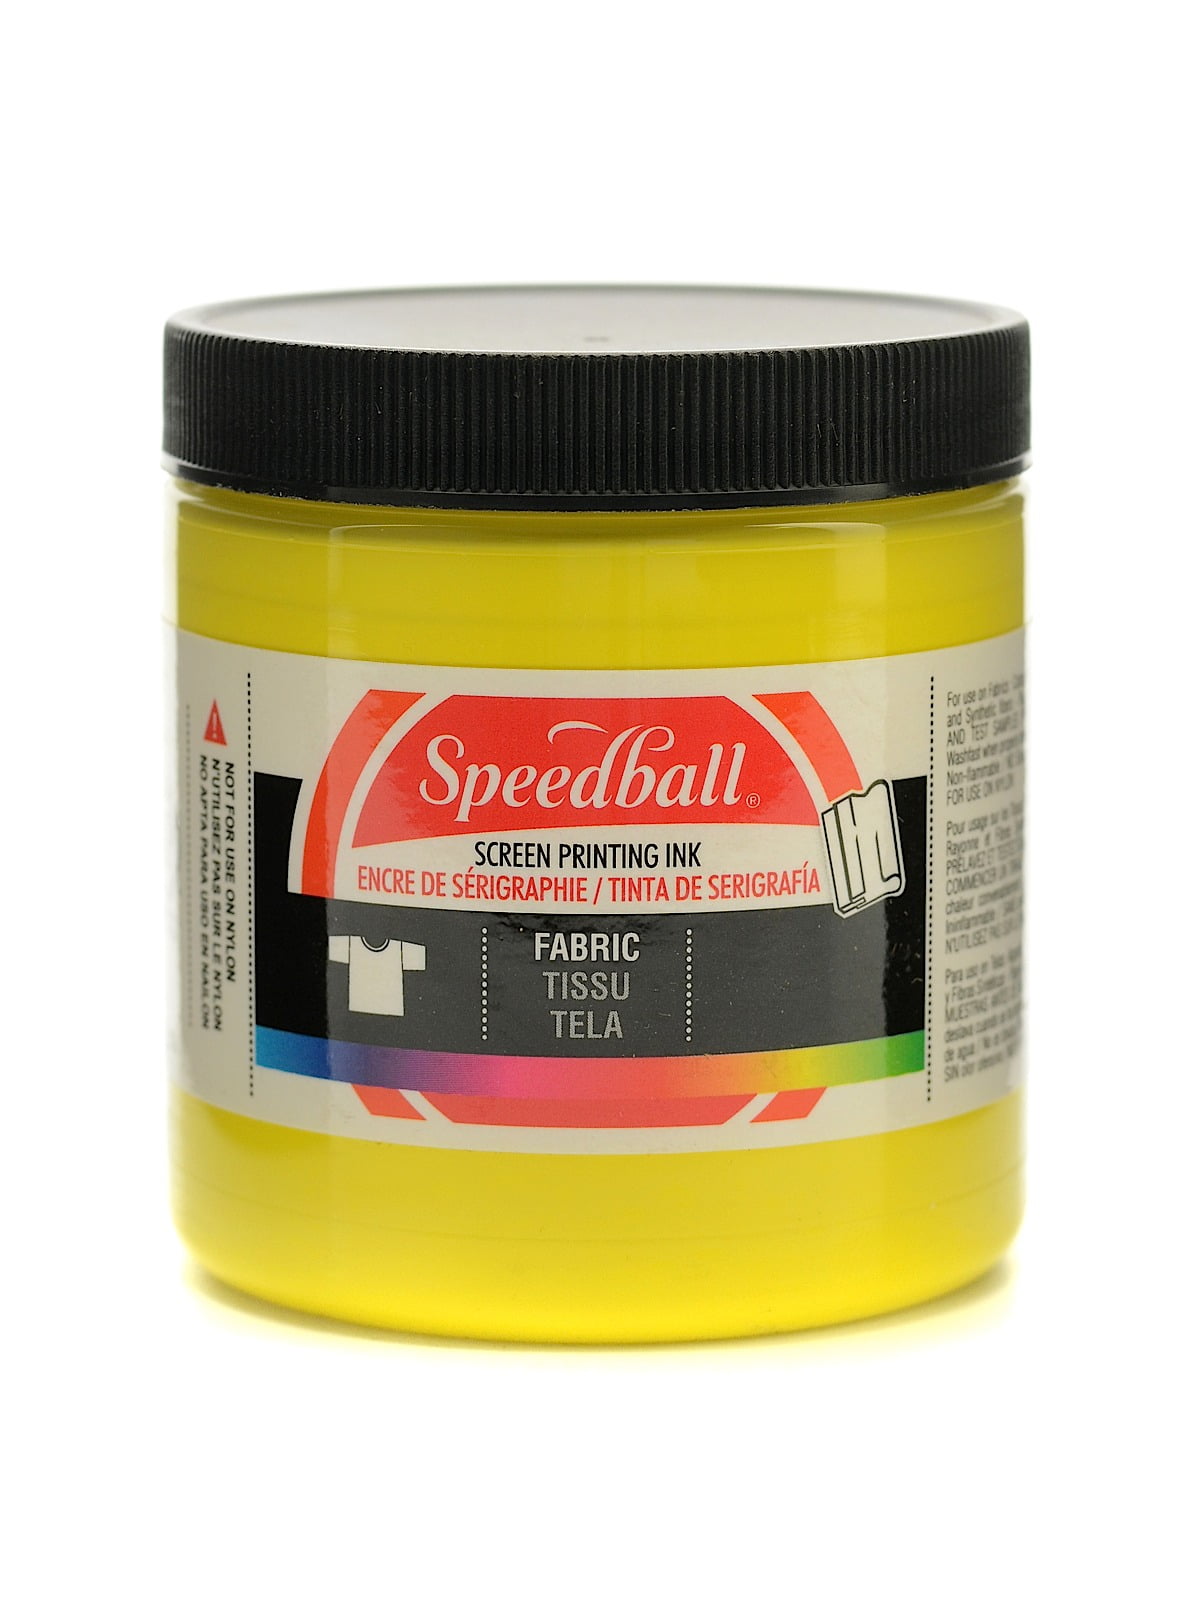 Fabric Screen Printing Ink white, 8 oz. (pack of 3) 